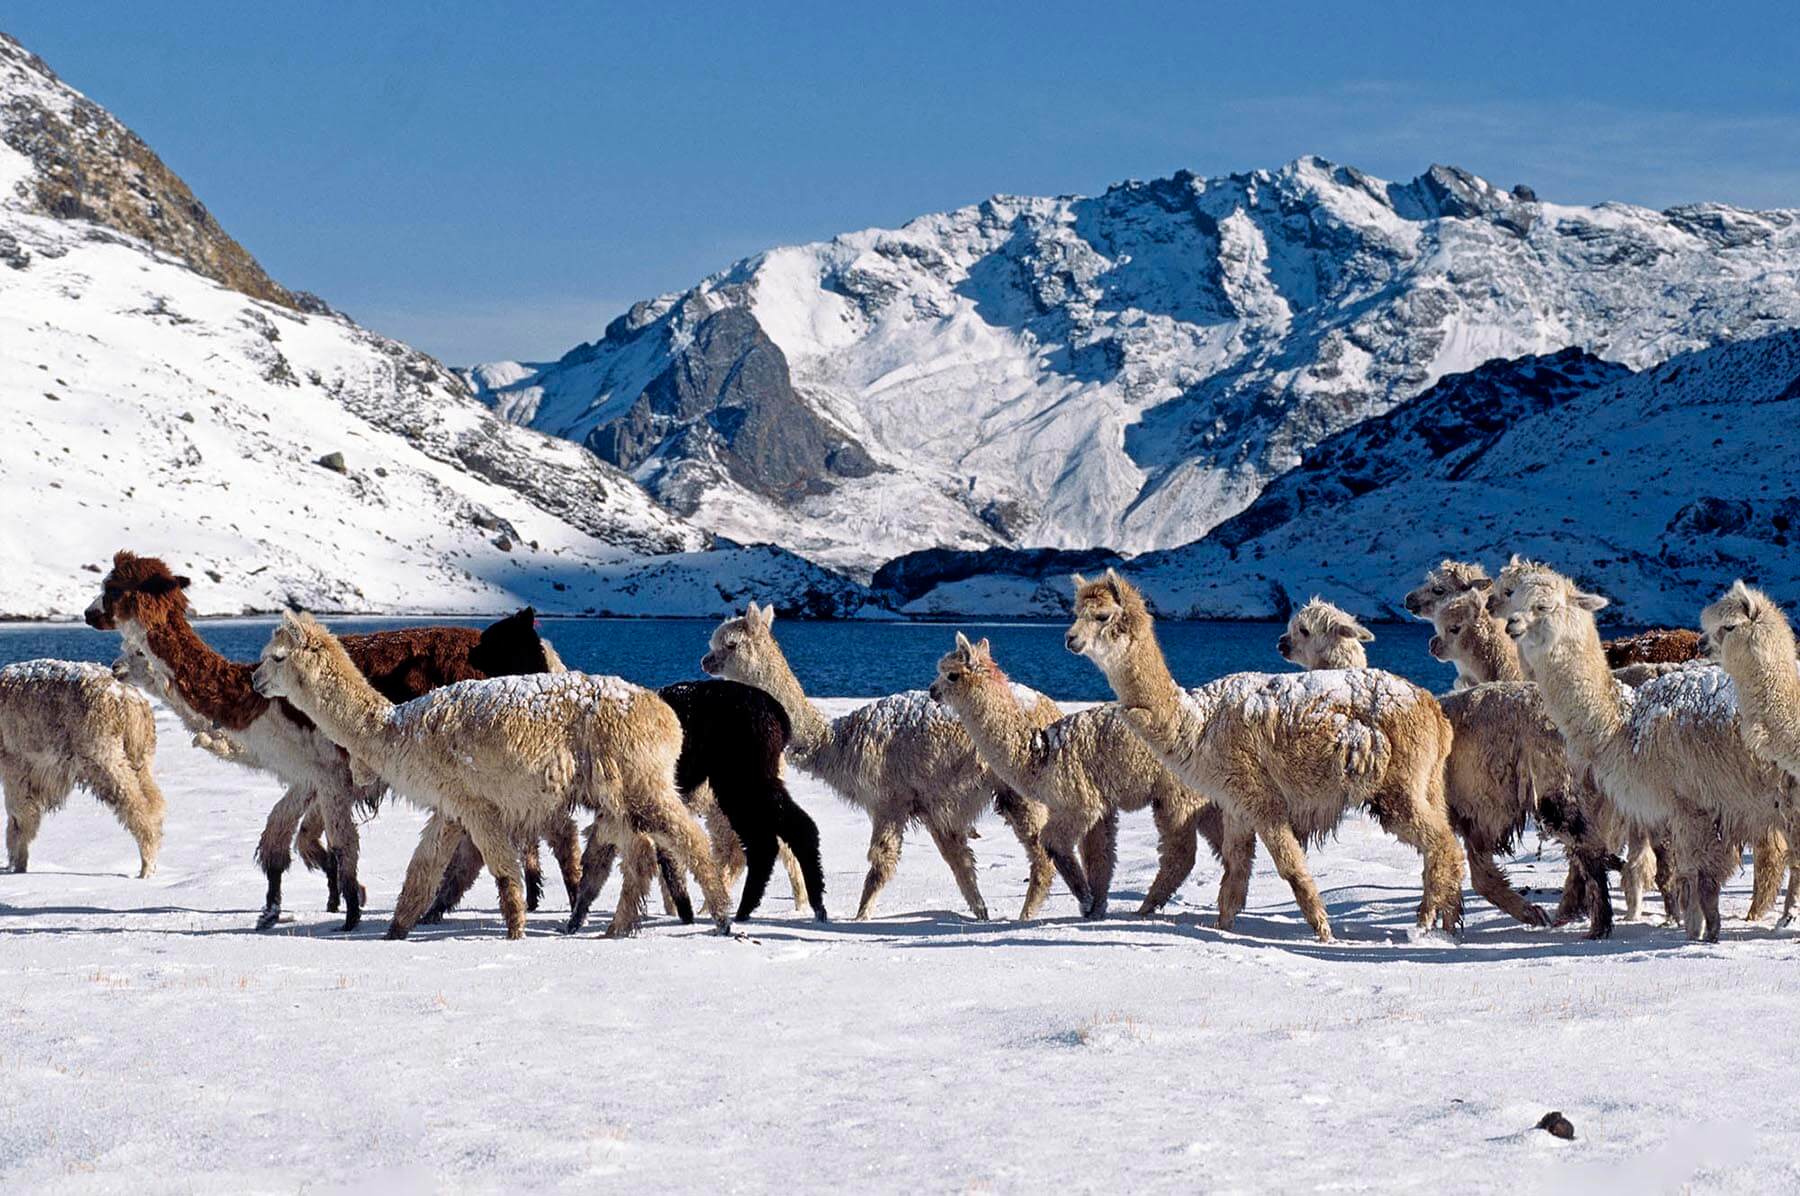 A herd of snow dusted ALPACAS pass by LAGUNA JATUN PUCACOCHA on the AUZANGATE TREK in the PERUVIAN ANDES. - Travel photography by Eagle Visions Photography